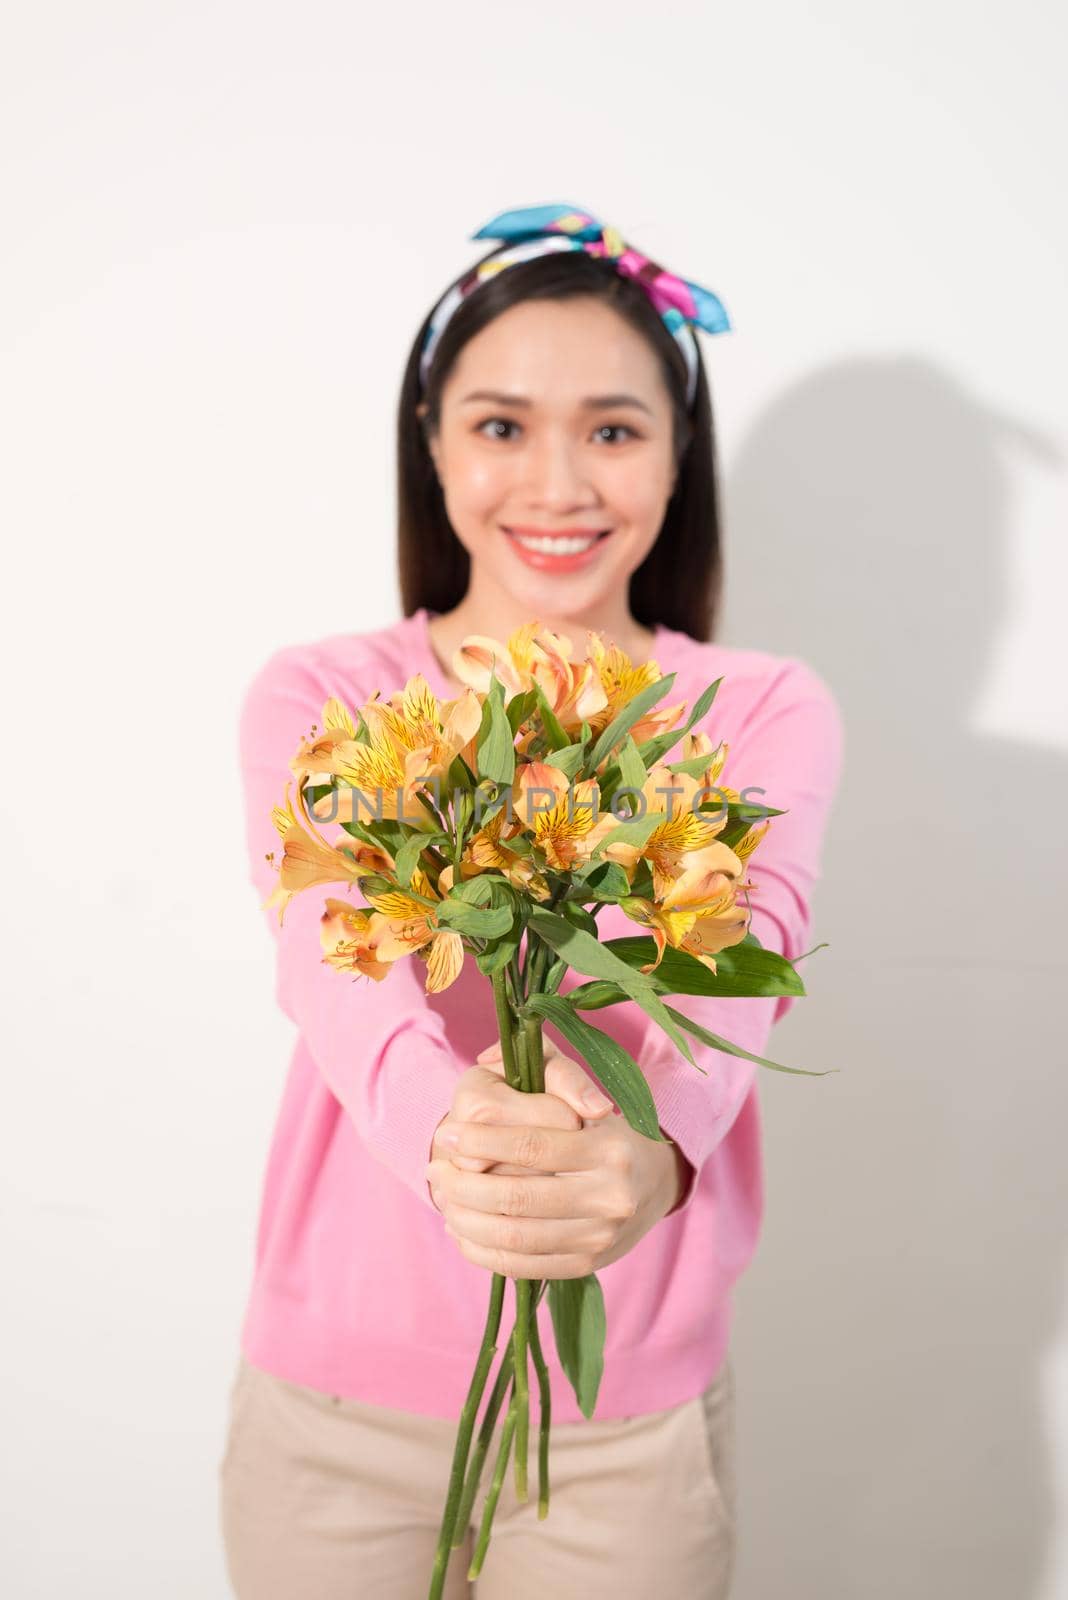 Toothy smiling happy woman holding flower . White background isolated portrait - image